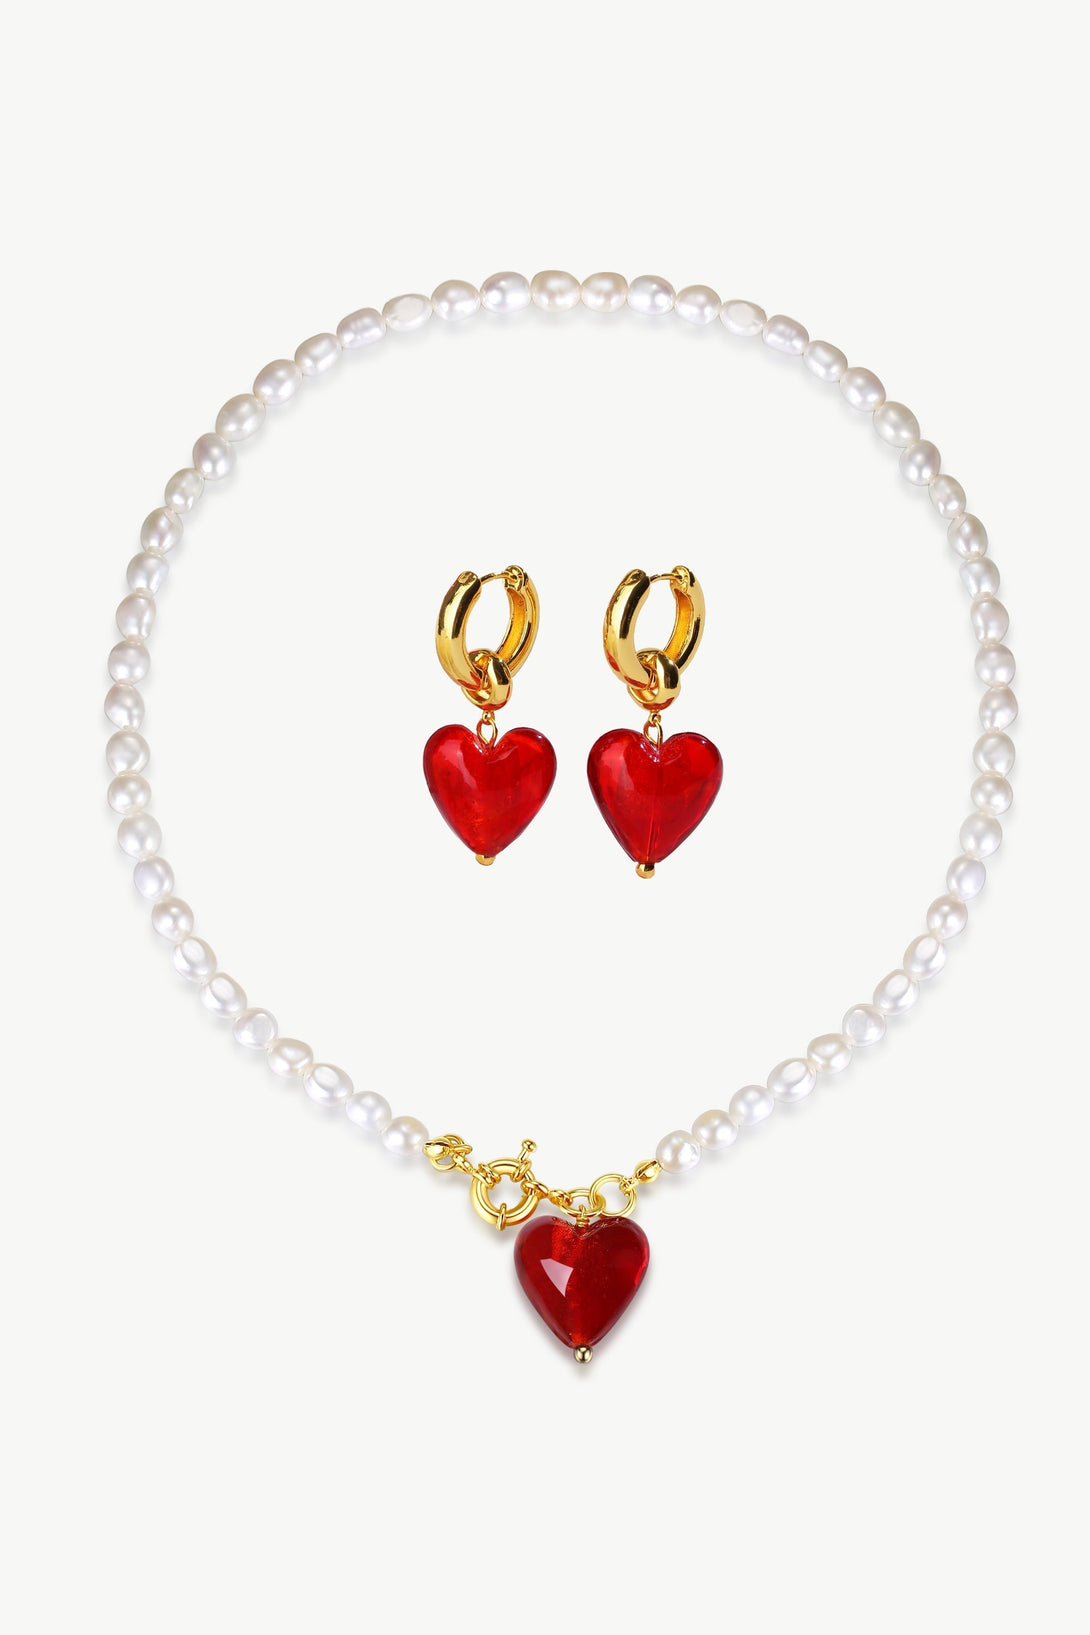 Esmée Red Glaze Heart Pendant Pearl Necklace and Earrings Set - Classicharms